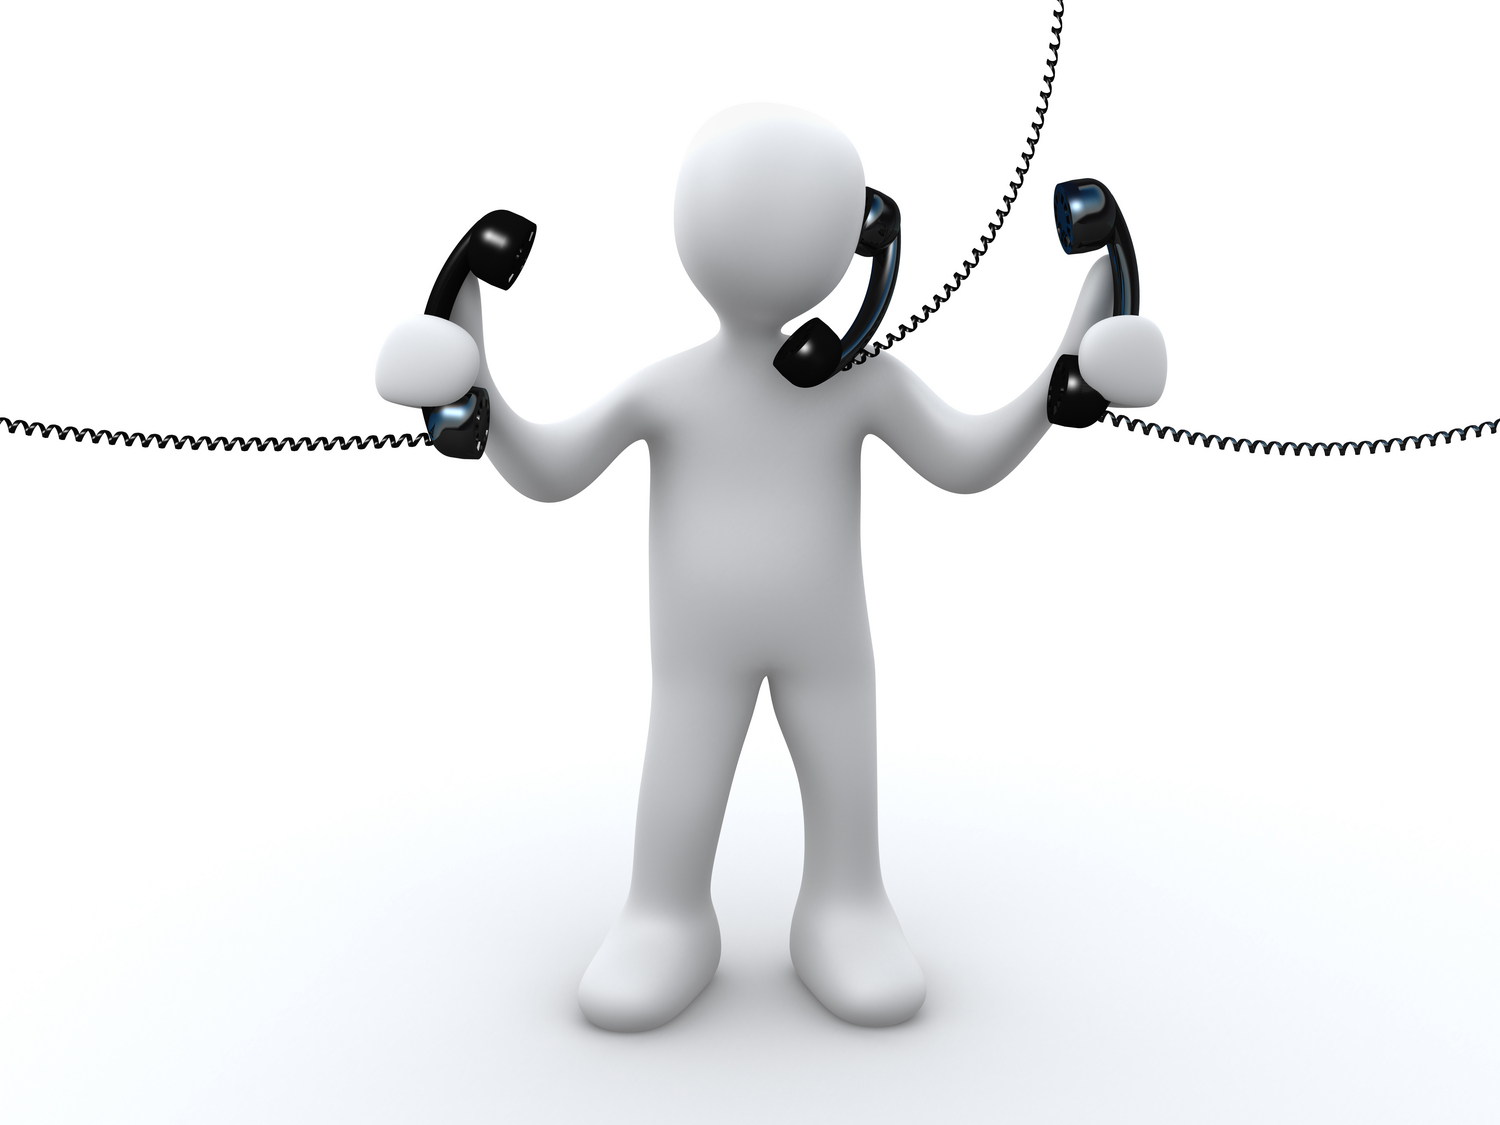 Cell Phone Call Clipart .